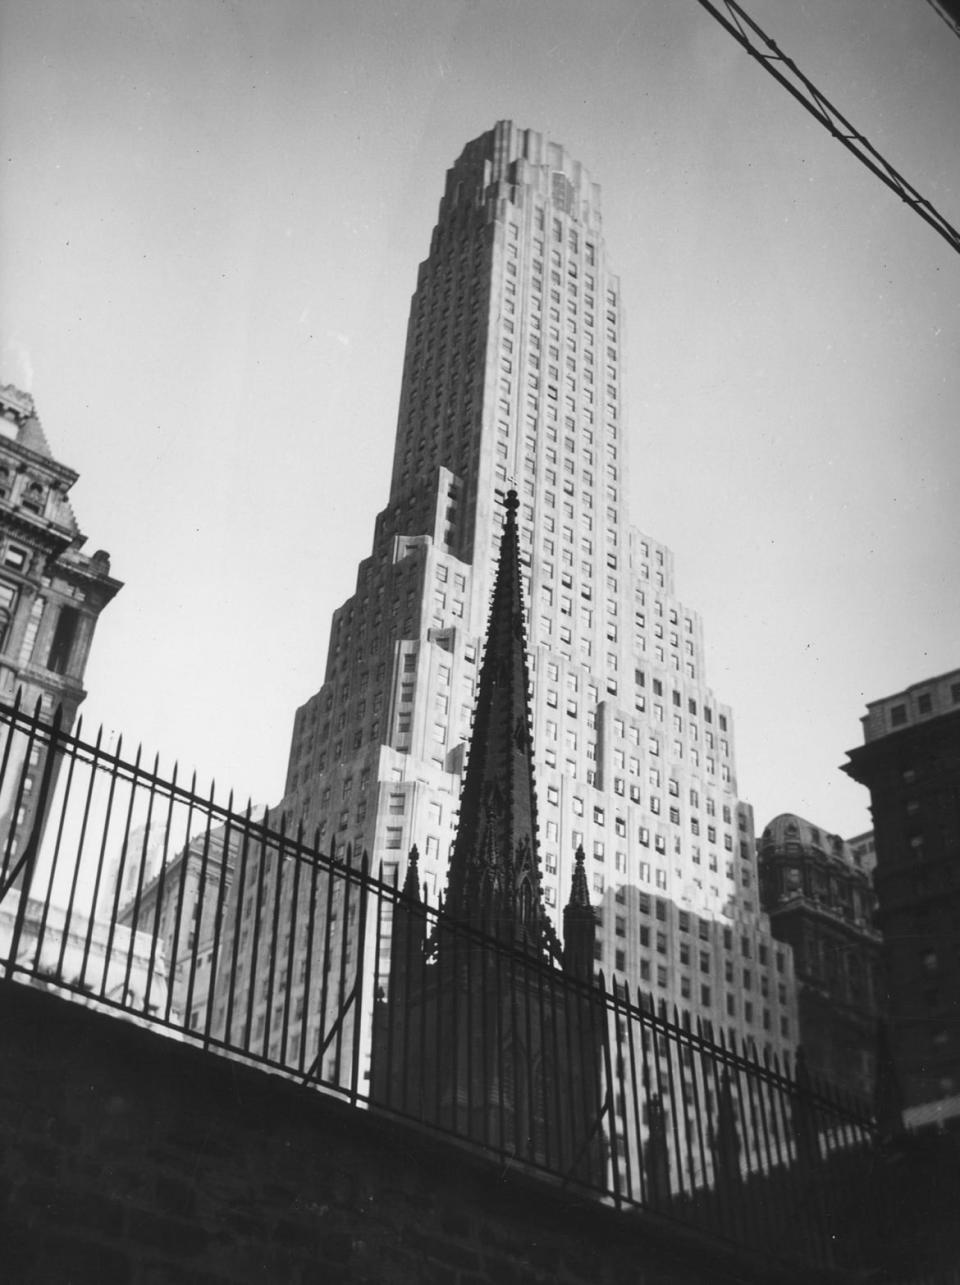 <div class="inline-image__caption"><p>One Wall Street and Trinity Church in 1929.</p></div> <div class="inline-image__credit">Irving Browning/The New York Historical Society/Getty Images</div>